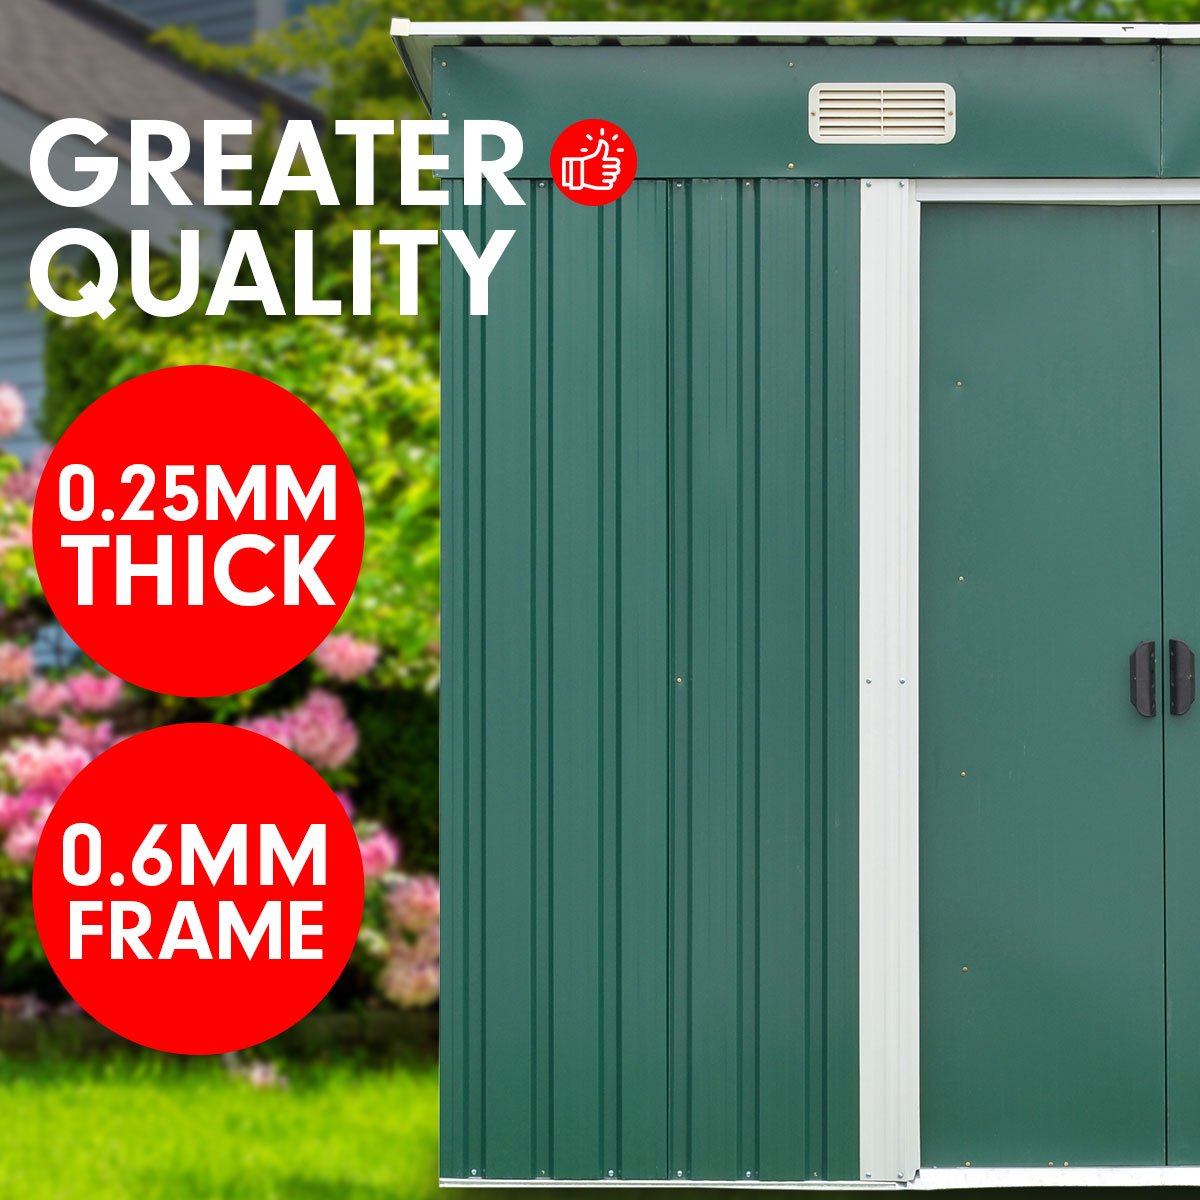 Shed Wallaroo 4ft x 8ft Garden Shed Outdoor Storage - Green